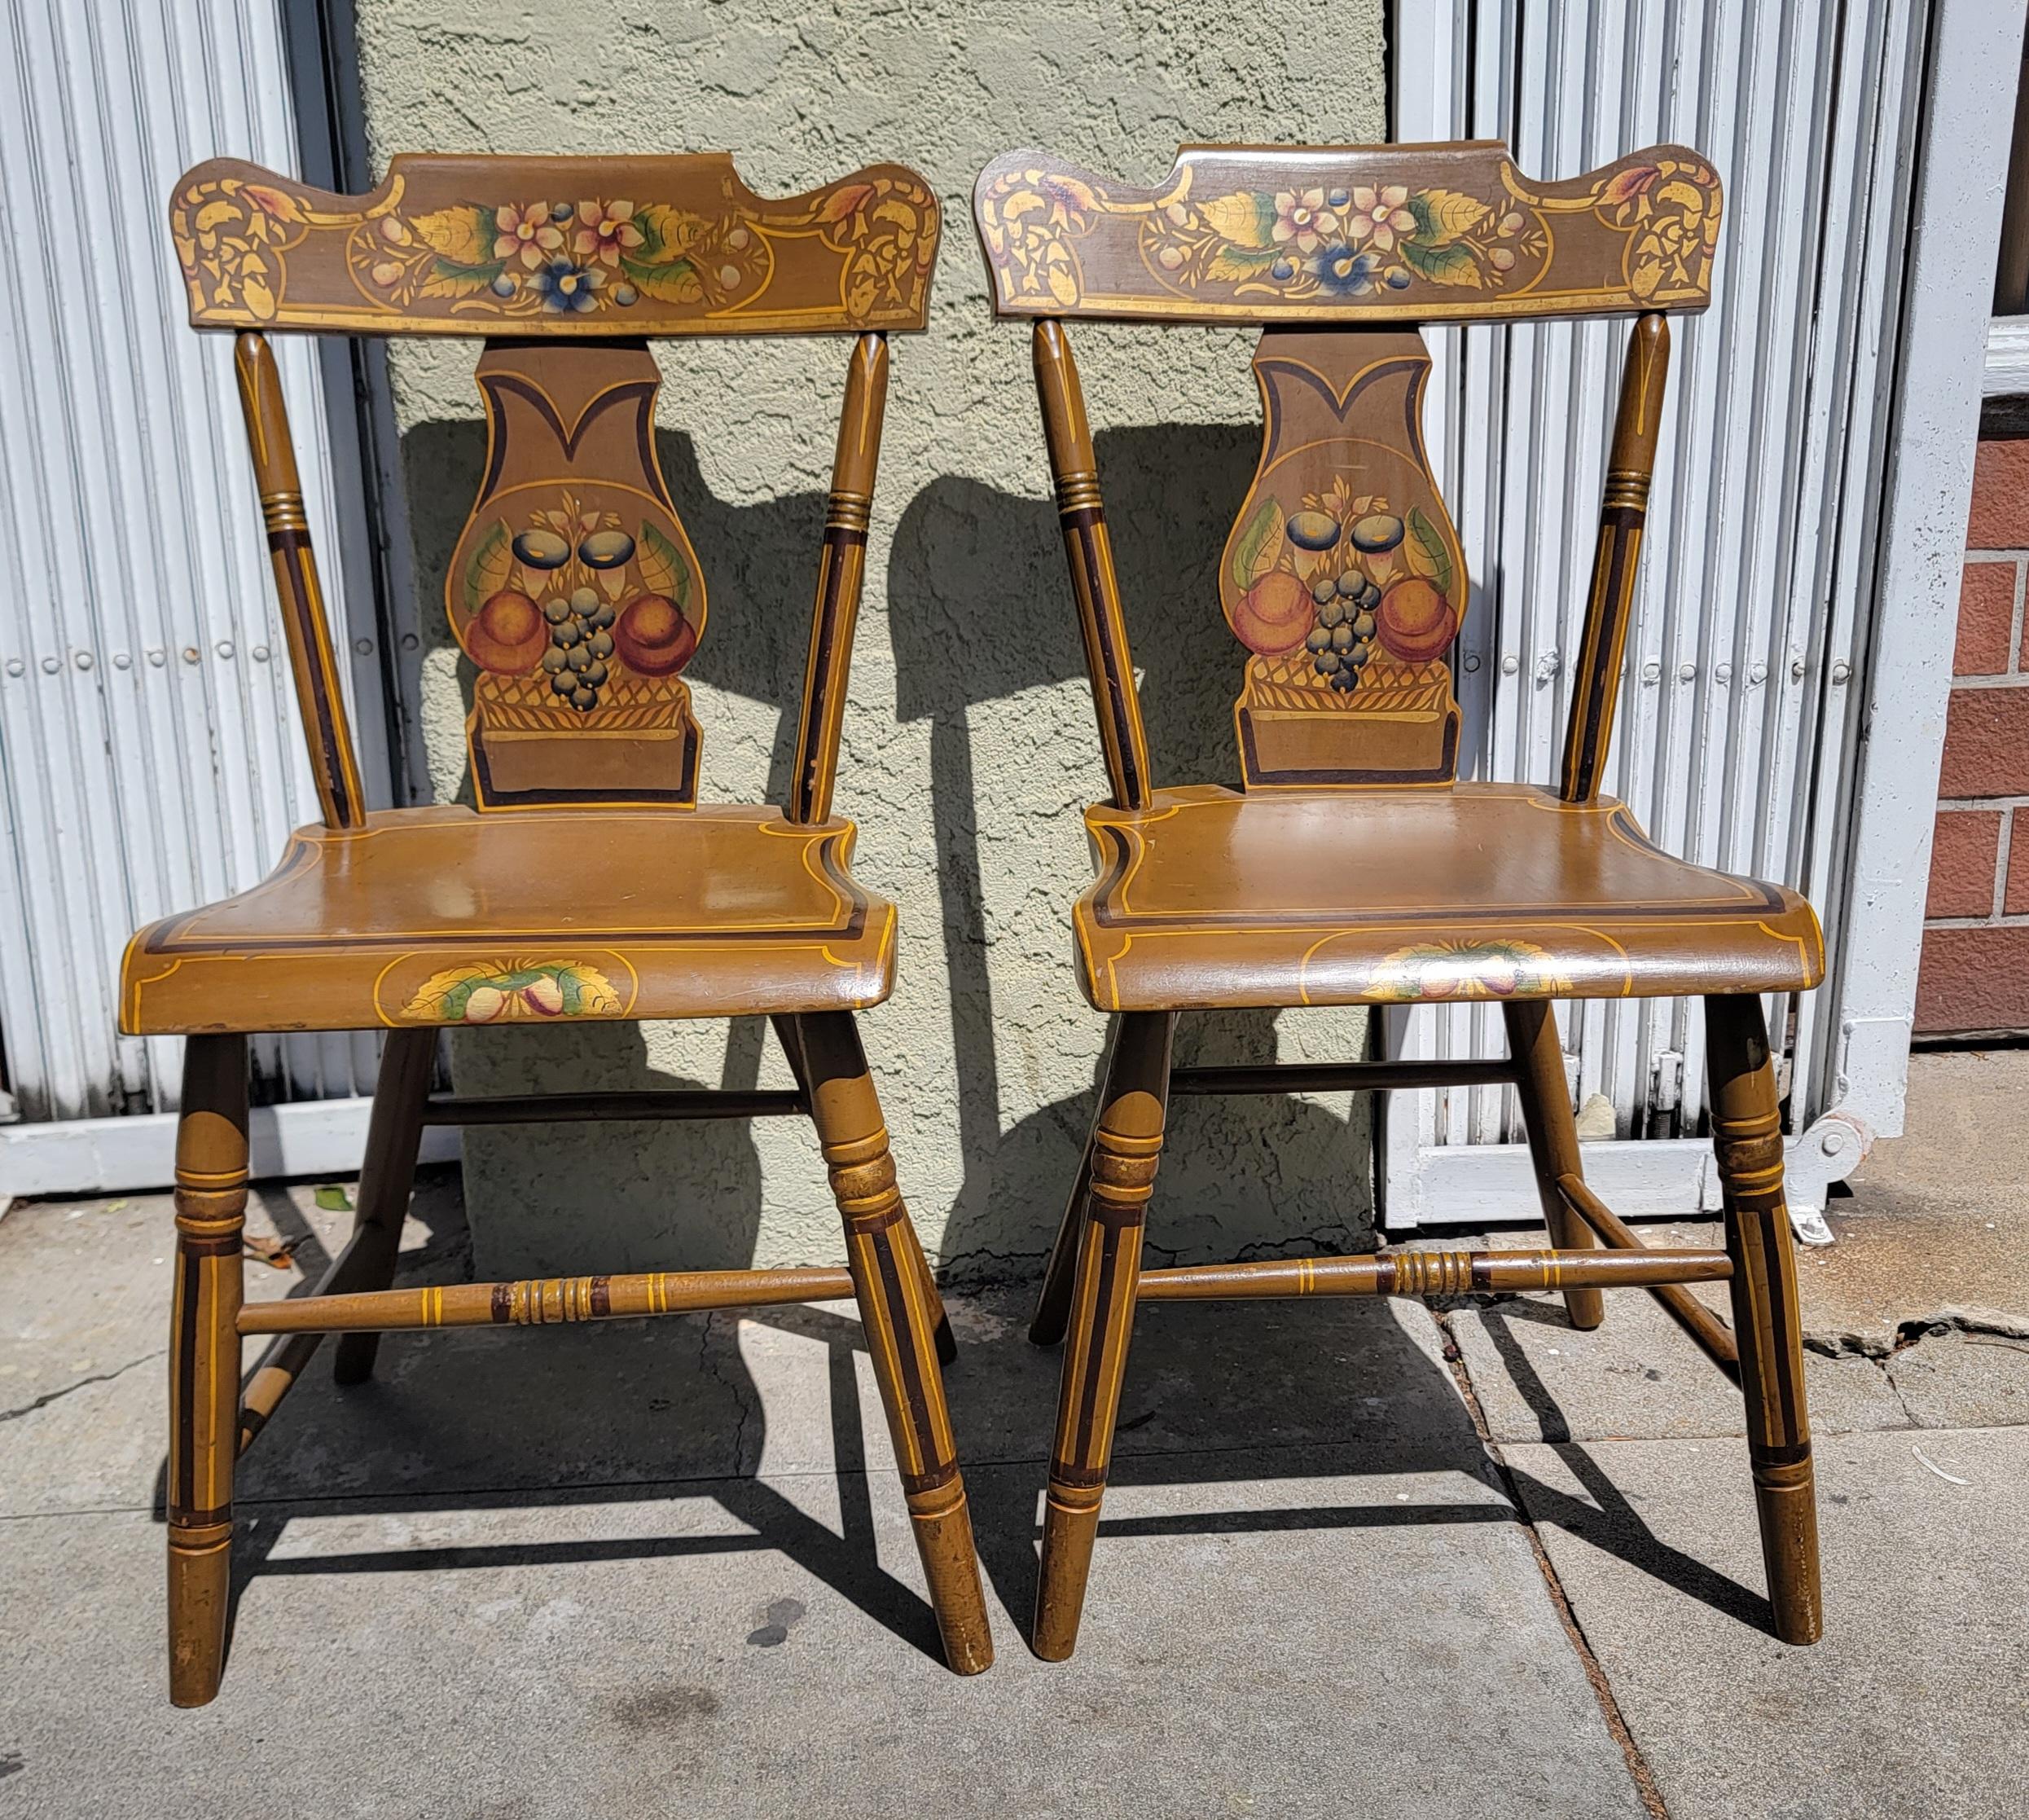 Other 19th C Original Painted Decorated Chairs, Lancaster County PA